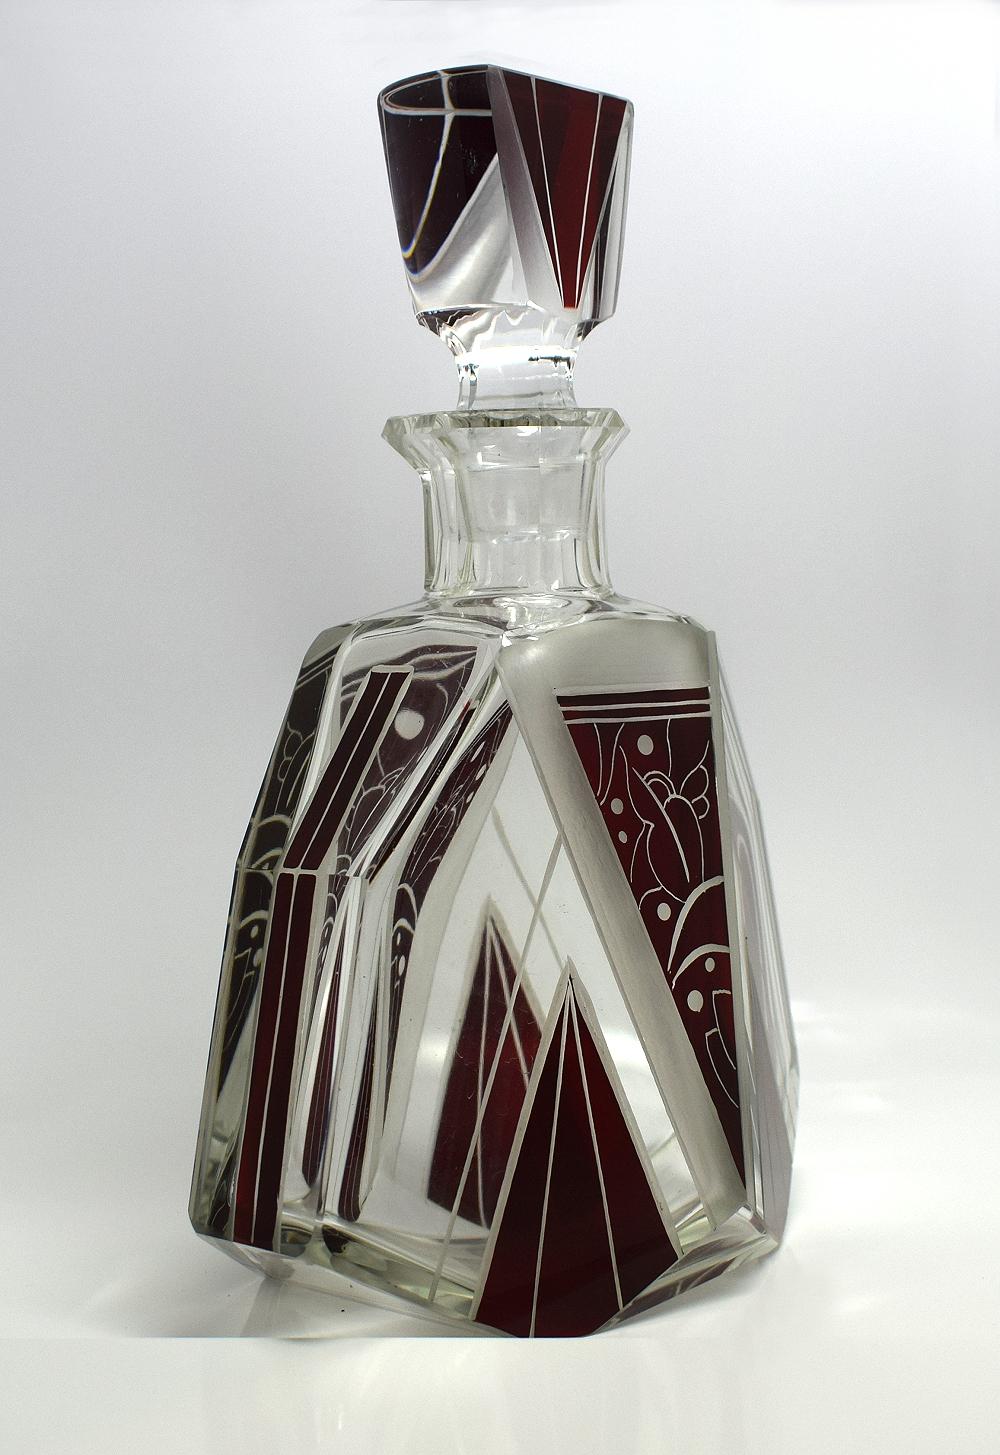 Fabulous 1930s Art Deco decanter set. Comprises a deceptively heavy cut-glass decanter, stopper and six good sized glasses, all with enamel and etched geometric decoration. The wonderful set oozes quality. All in great condition, free from nibbles